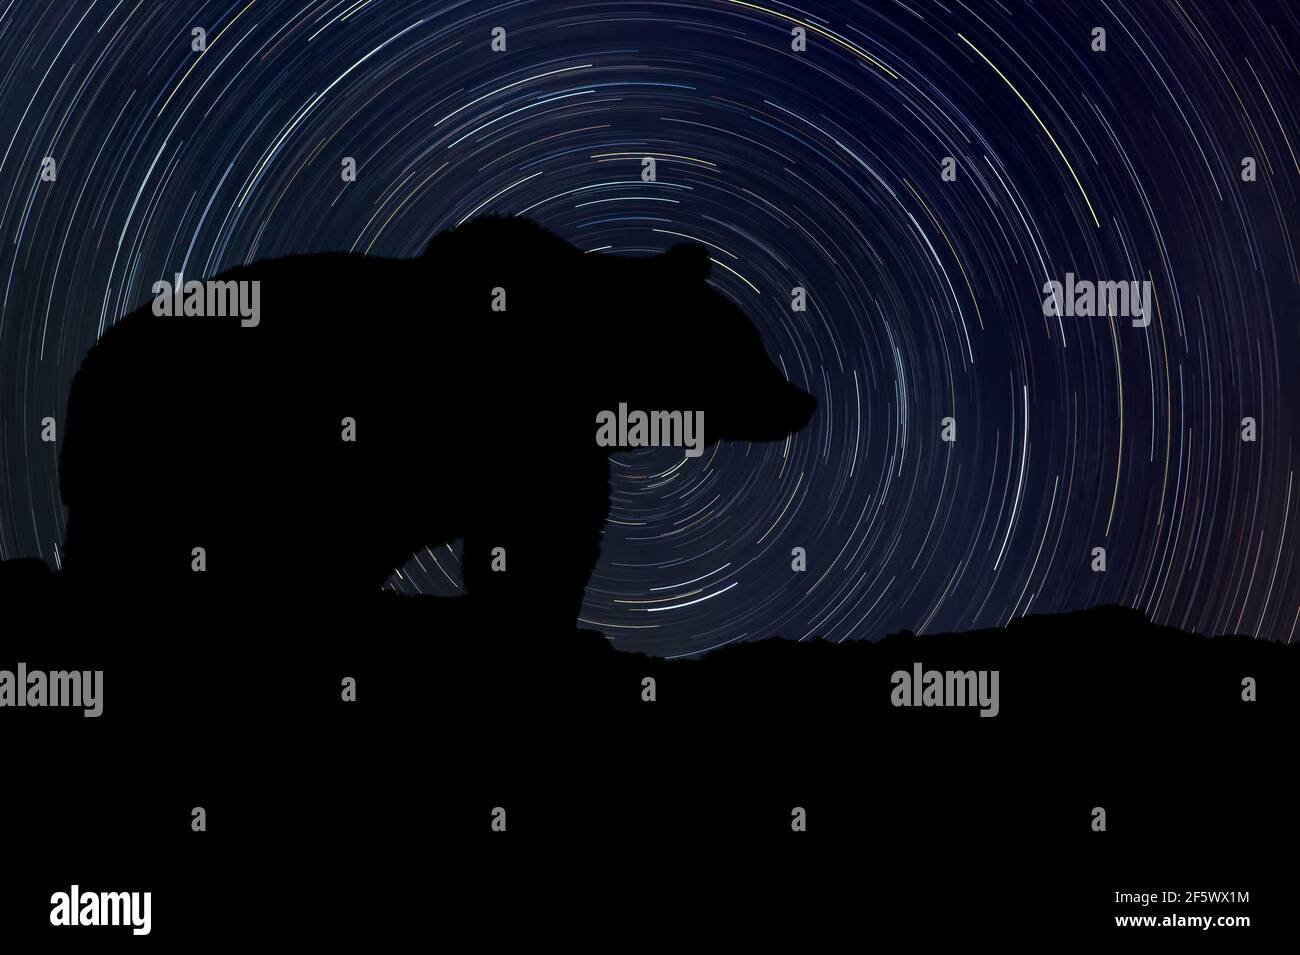 Silhouette of bear at night with startrail in the background Stock Photo